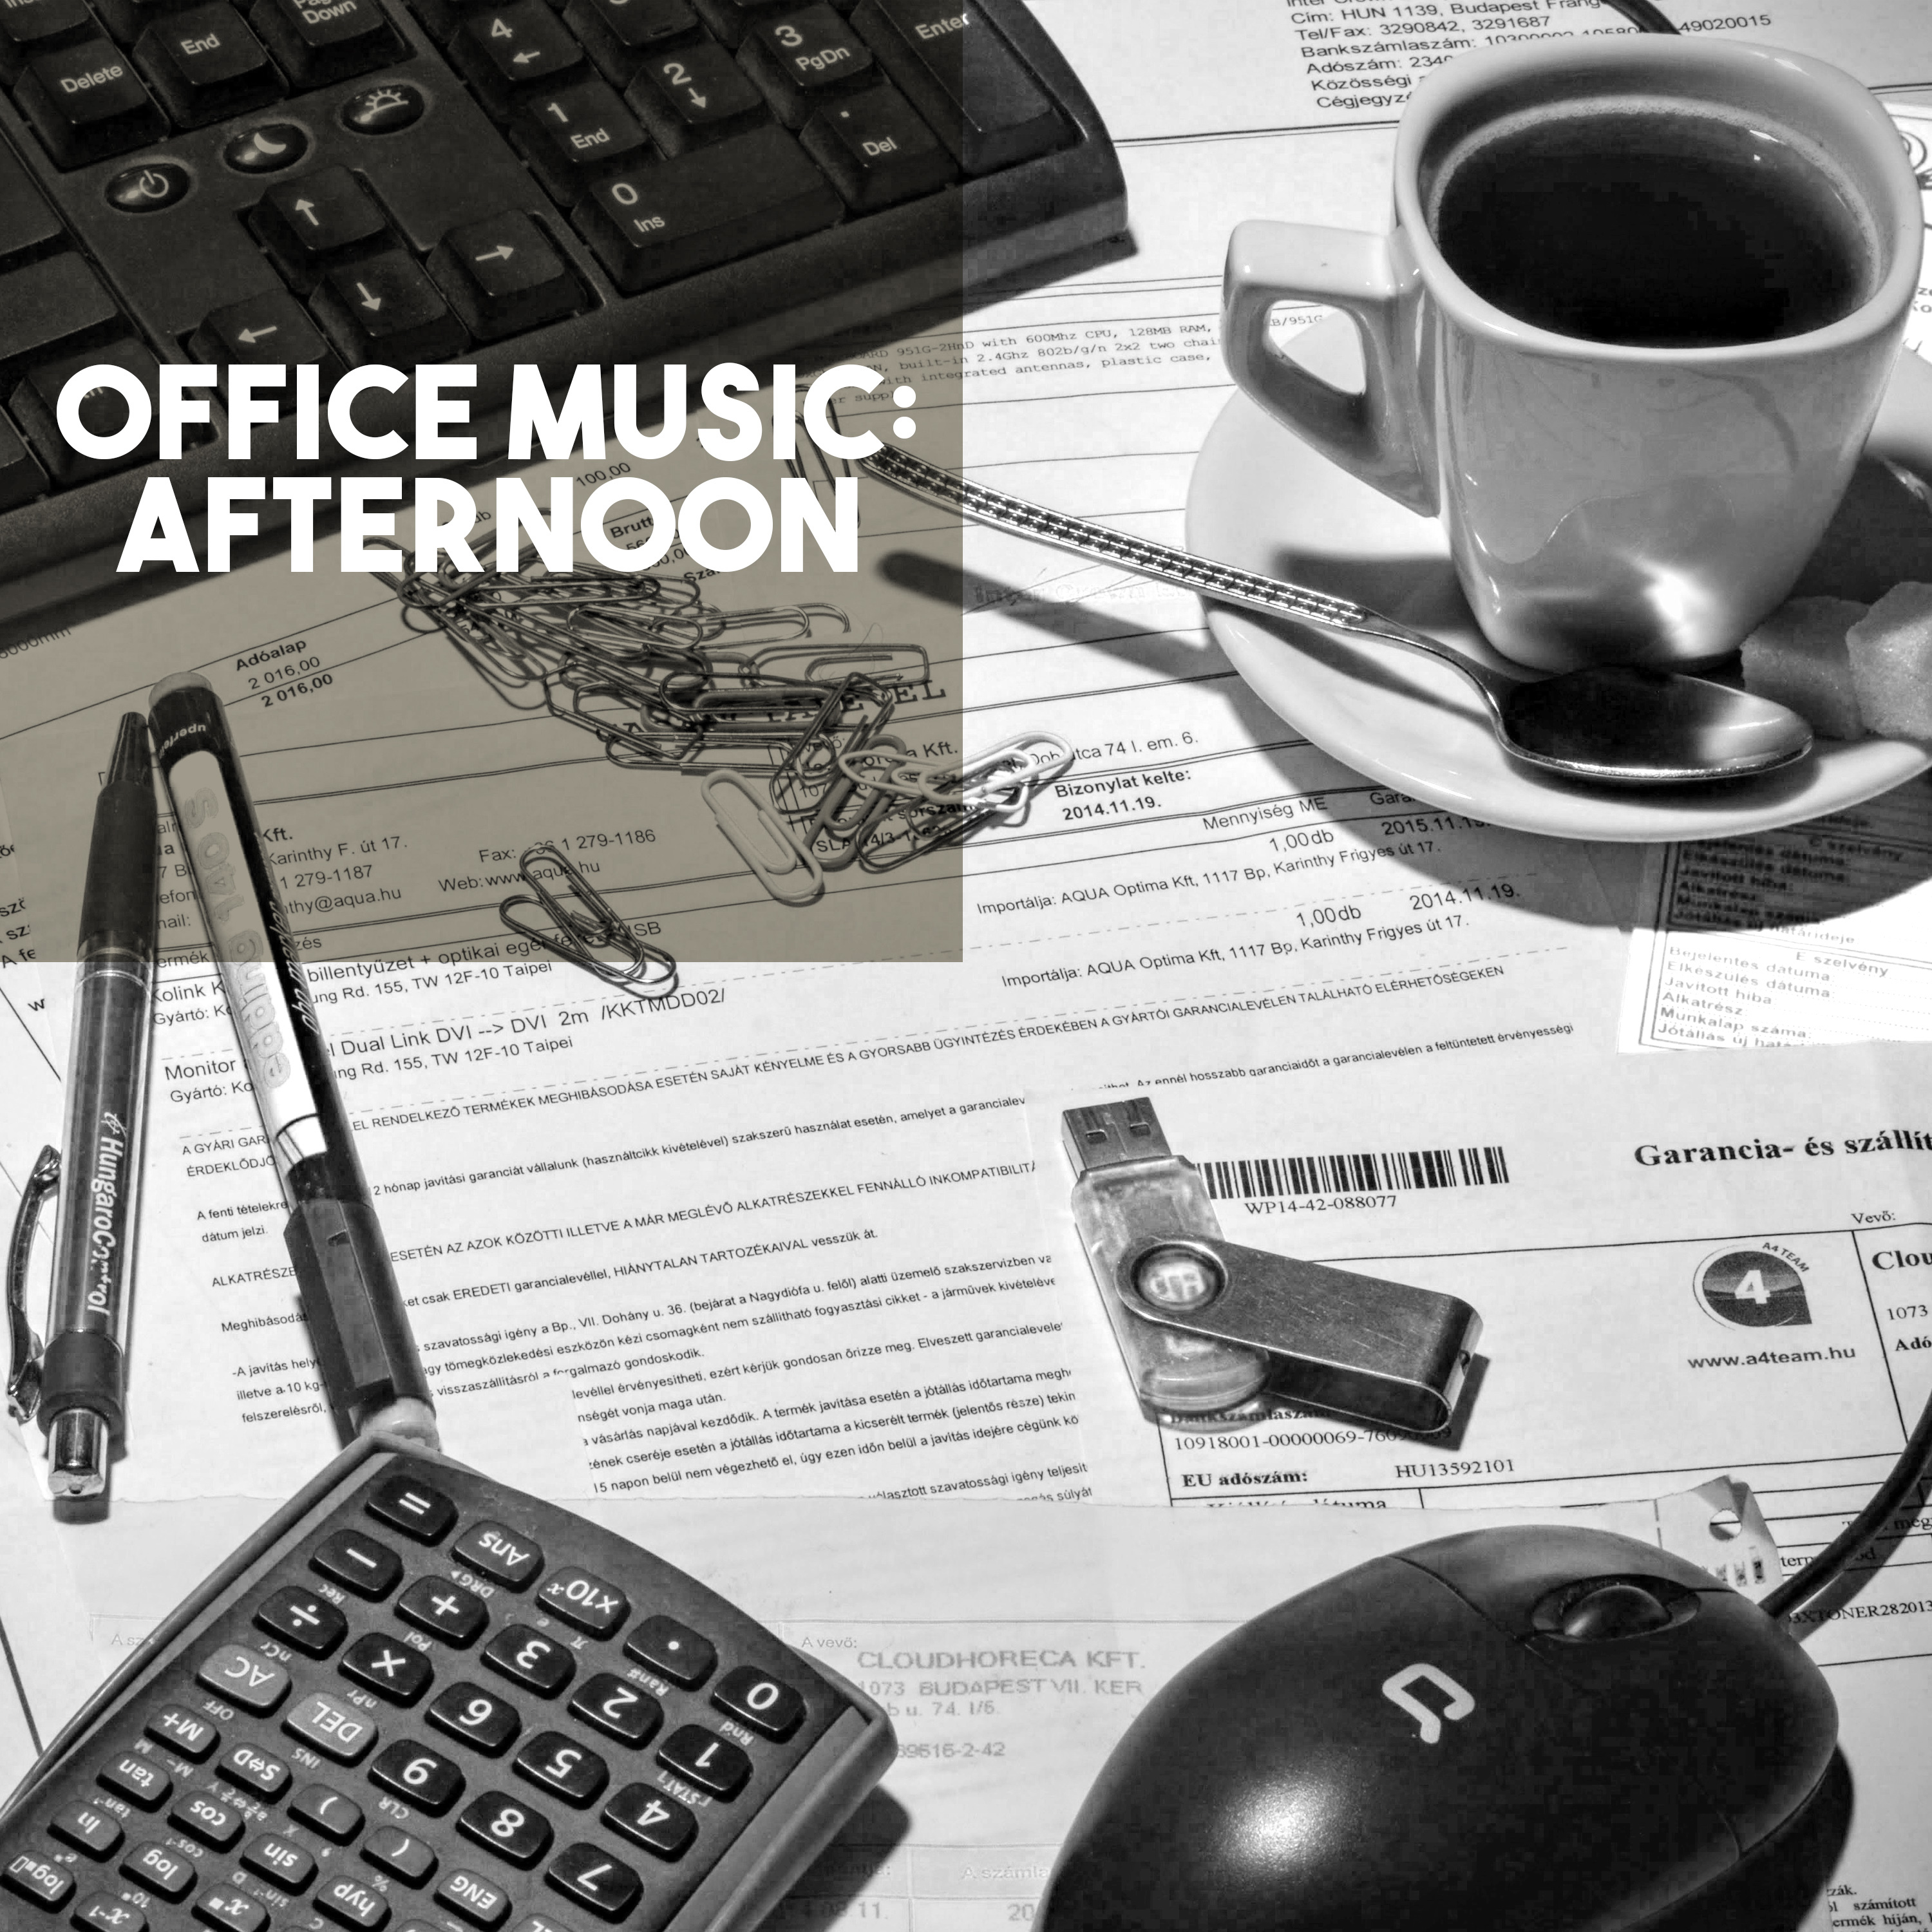 Office Music: Afternoon